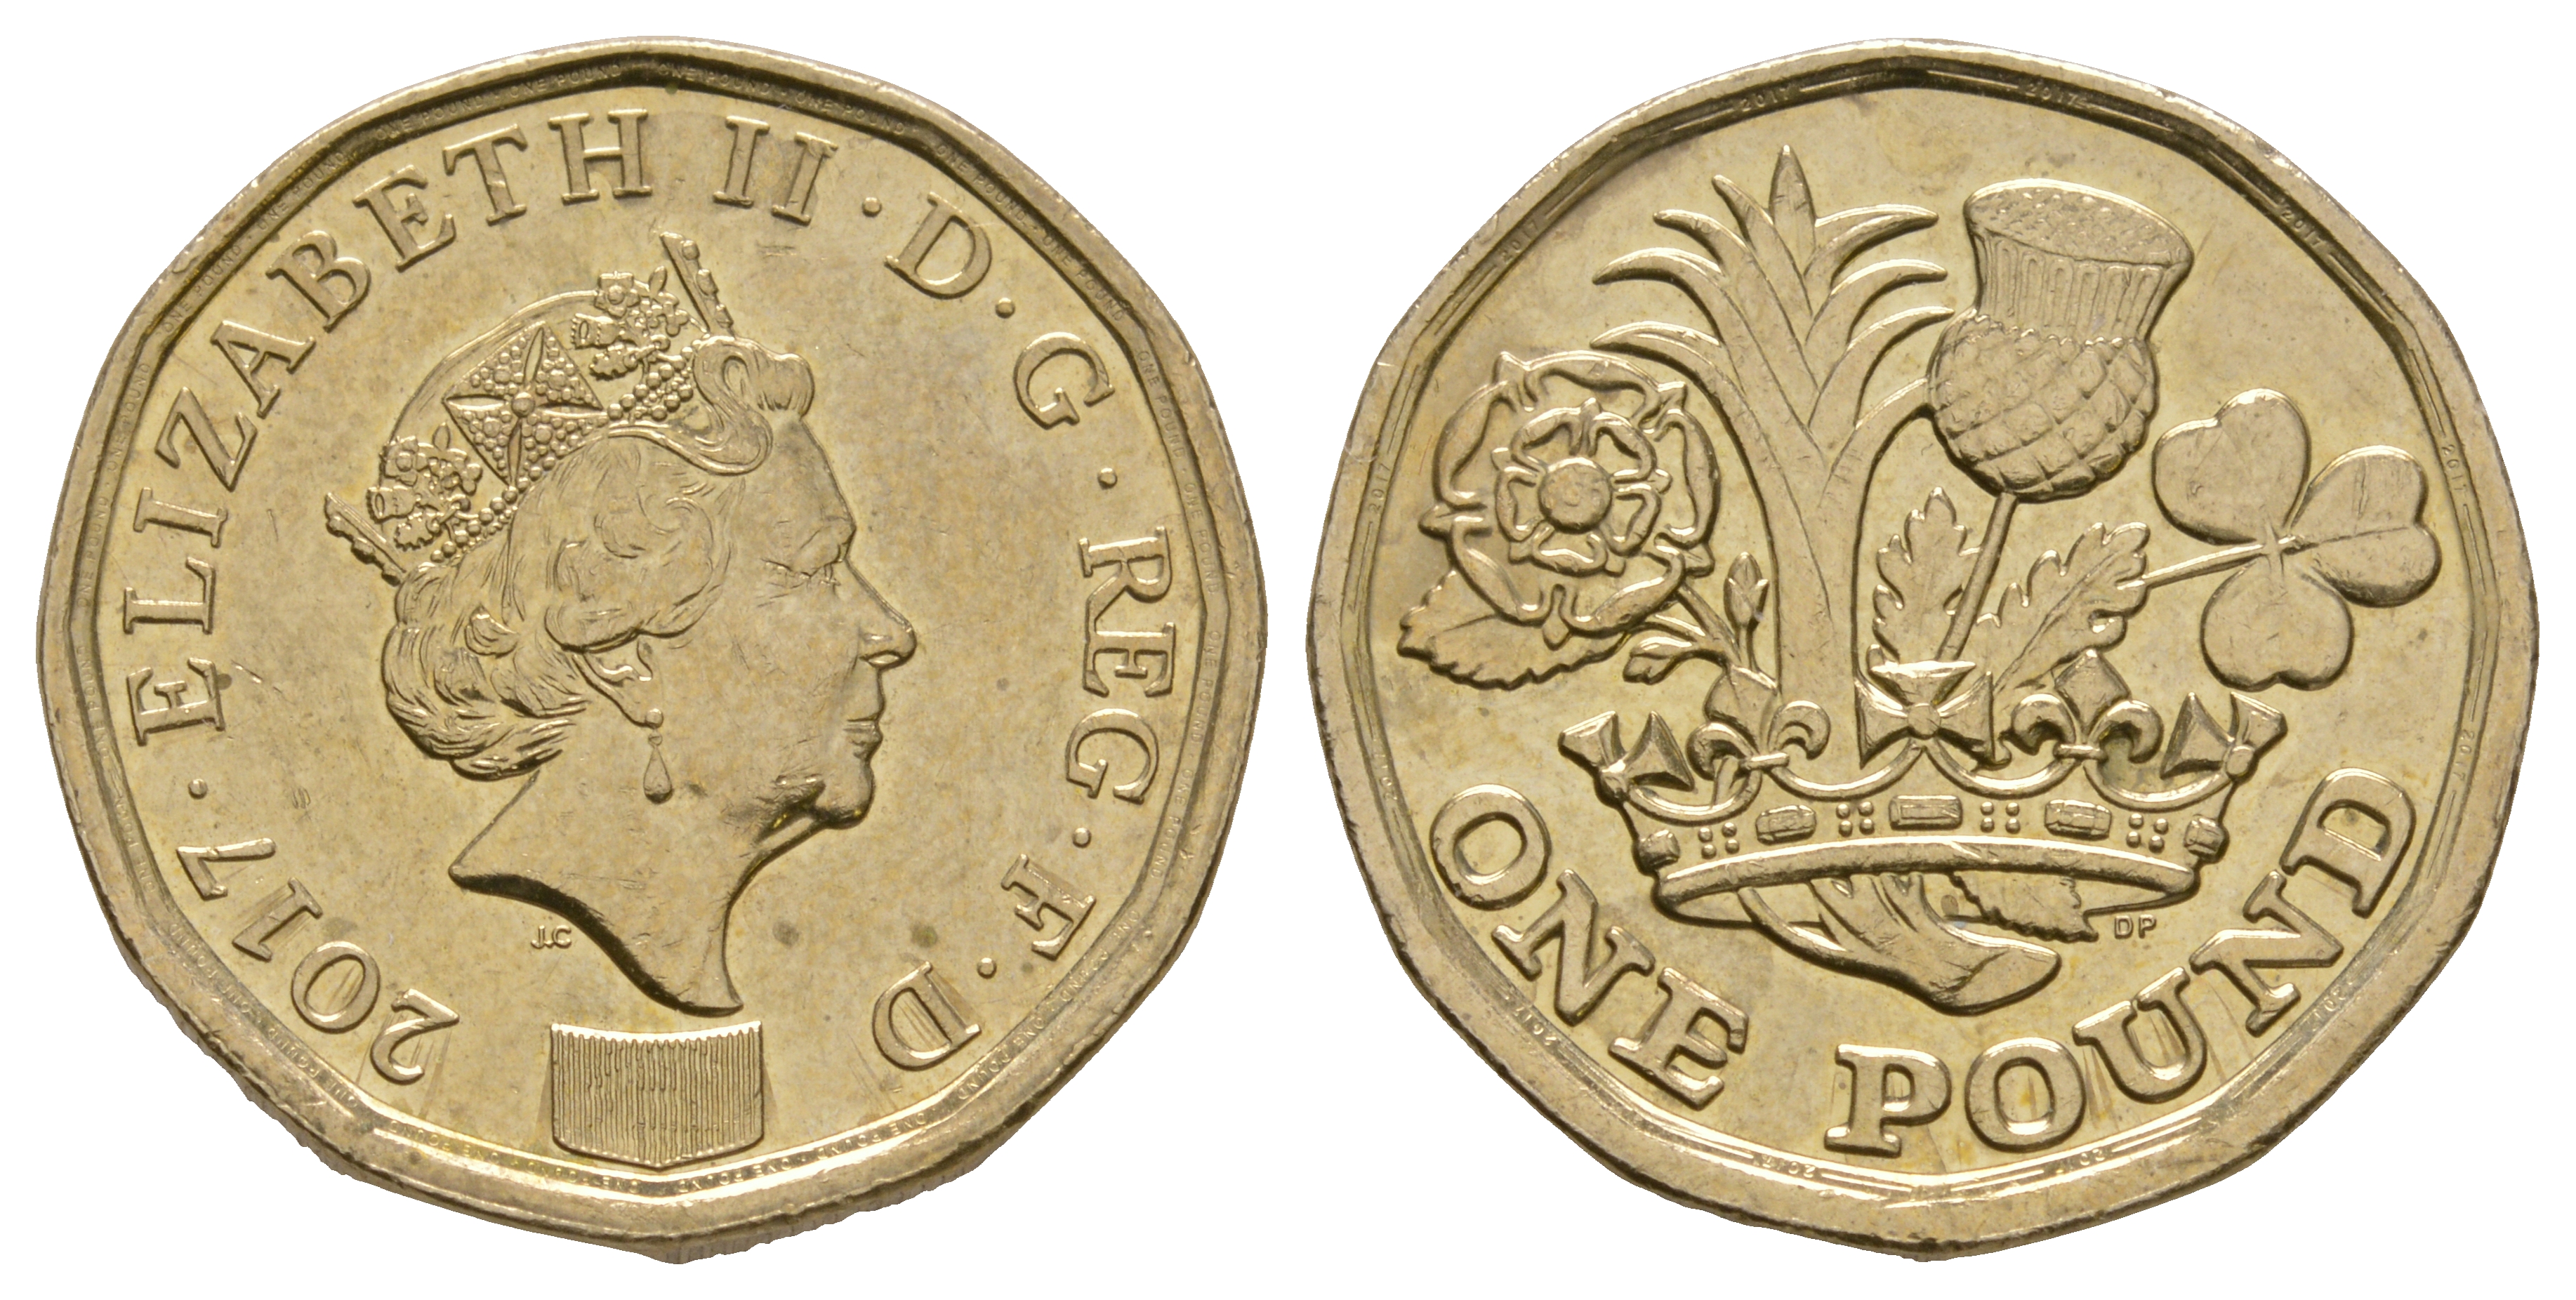 How a £1 coin produced in error could now be worth over £1000 at auction